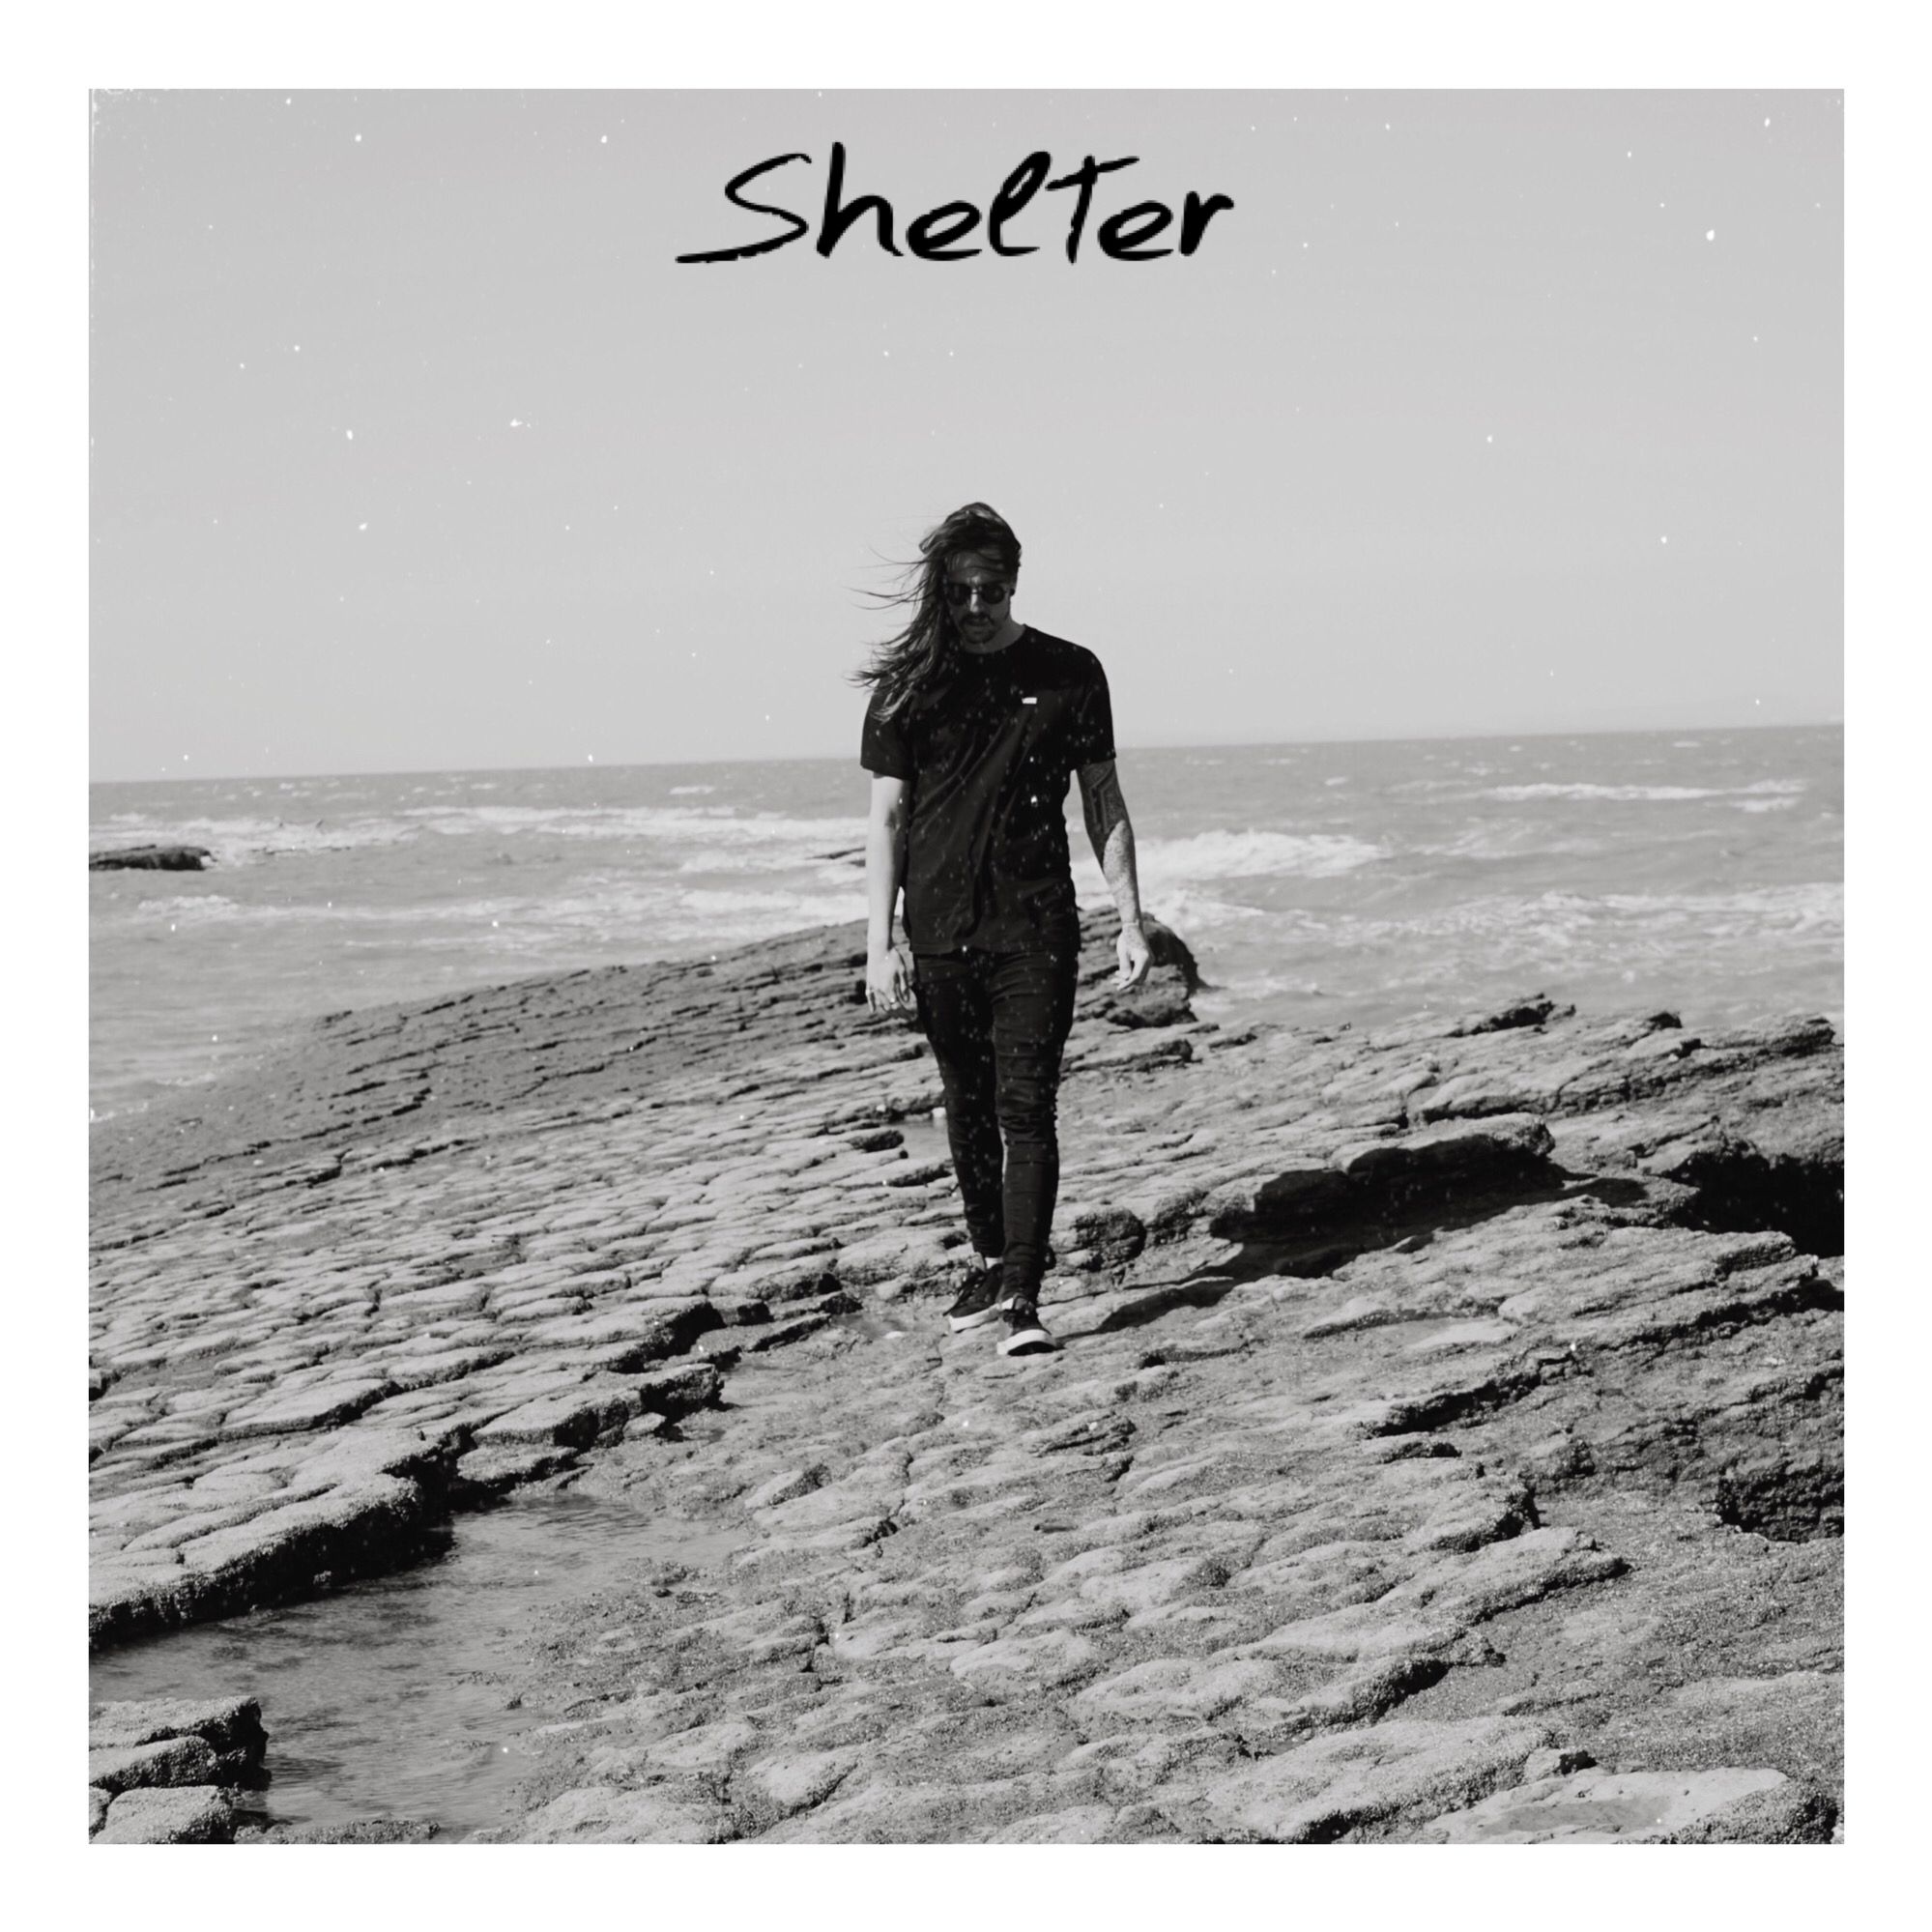 shelter - taylor t - UK - indie - indie music - indie rock - new music - music blog - wolf in a suit - wolfinasuit - wolf in a suit blog - wolf in a suit music blog